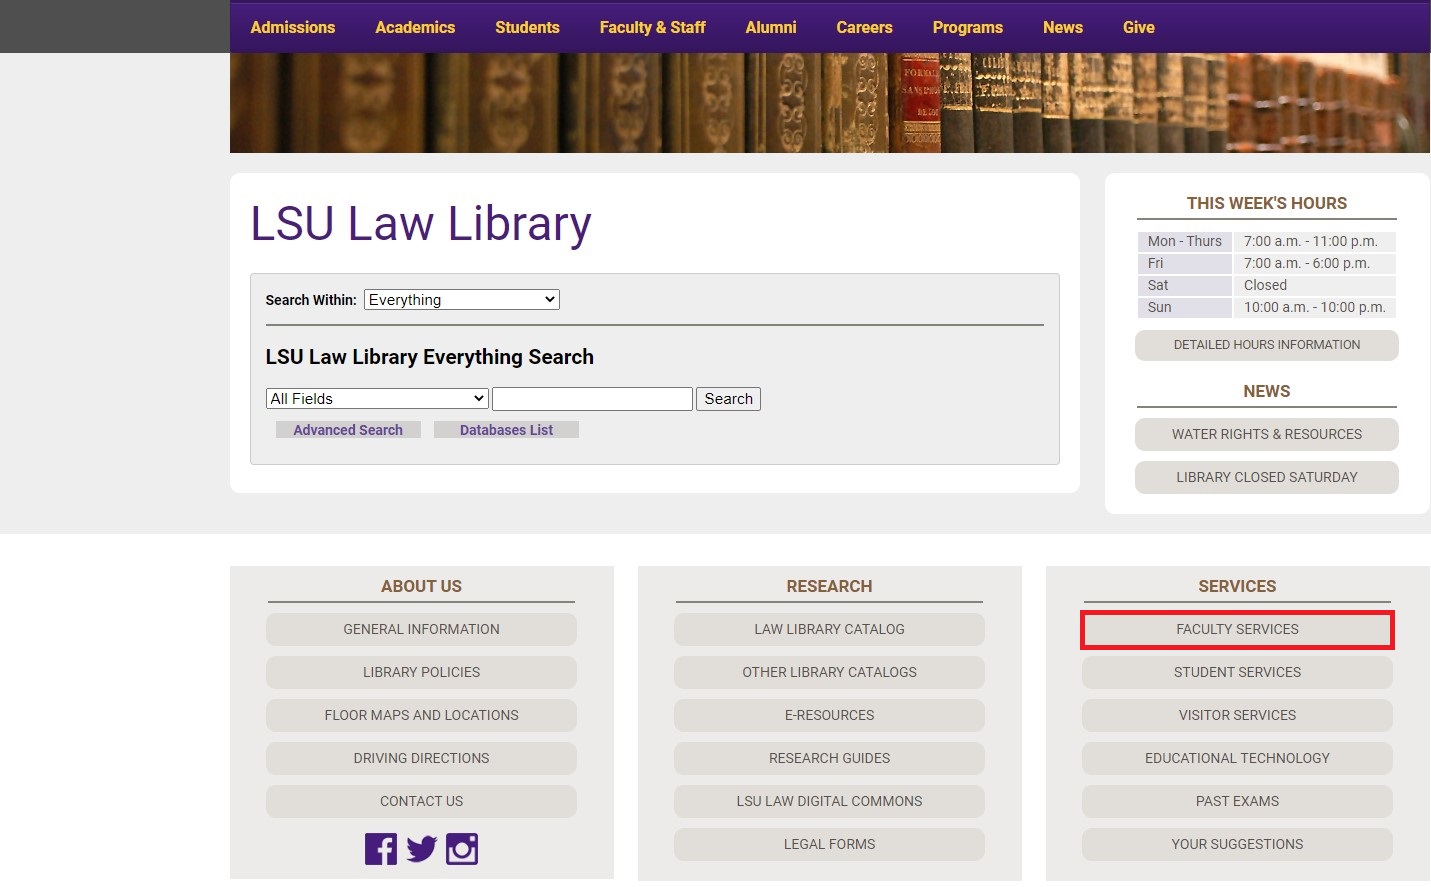 Faculty service on LSU law library homepage highlighted